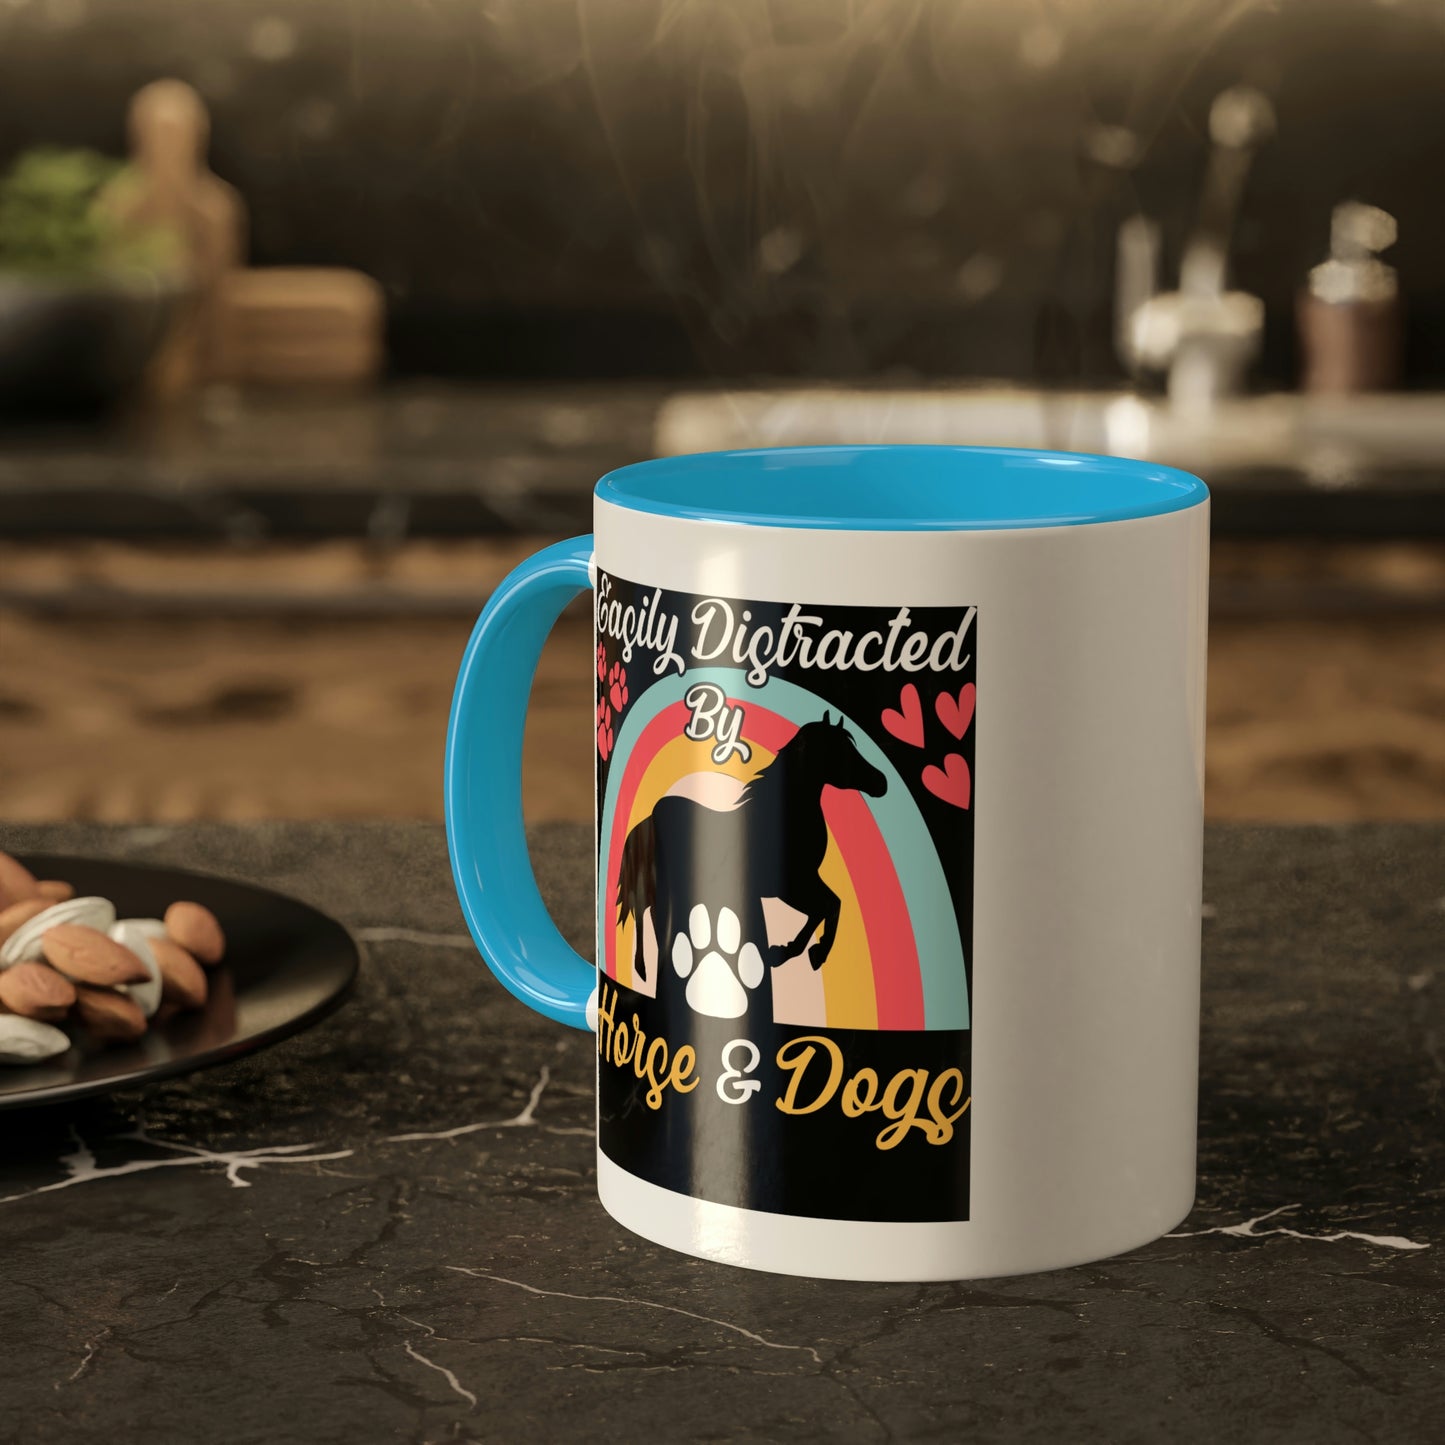 Easily Distracted by Horses and Dogs Accent Mug, 11oz